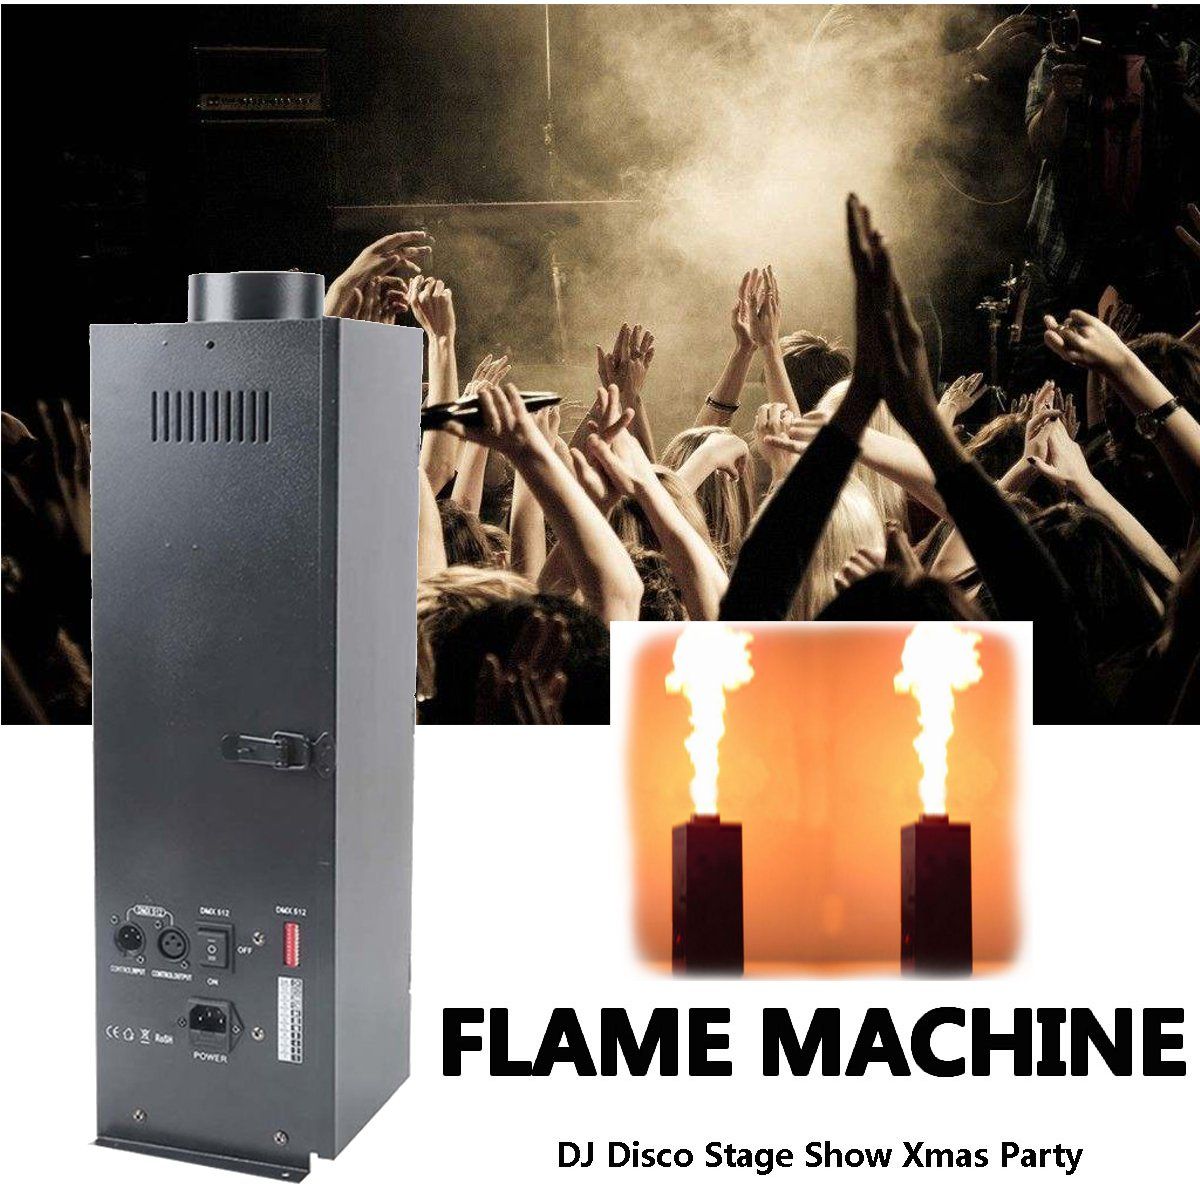 DMX-Thrower-Effect-Projector-DJ-Disco-Stage-Show-Xmas-Party-Flame-Machine-Flamethrower-1541896